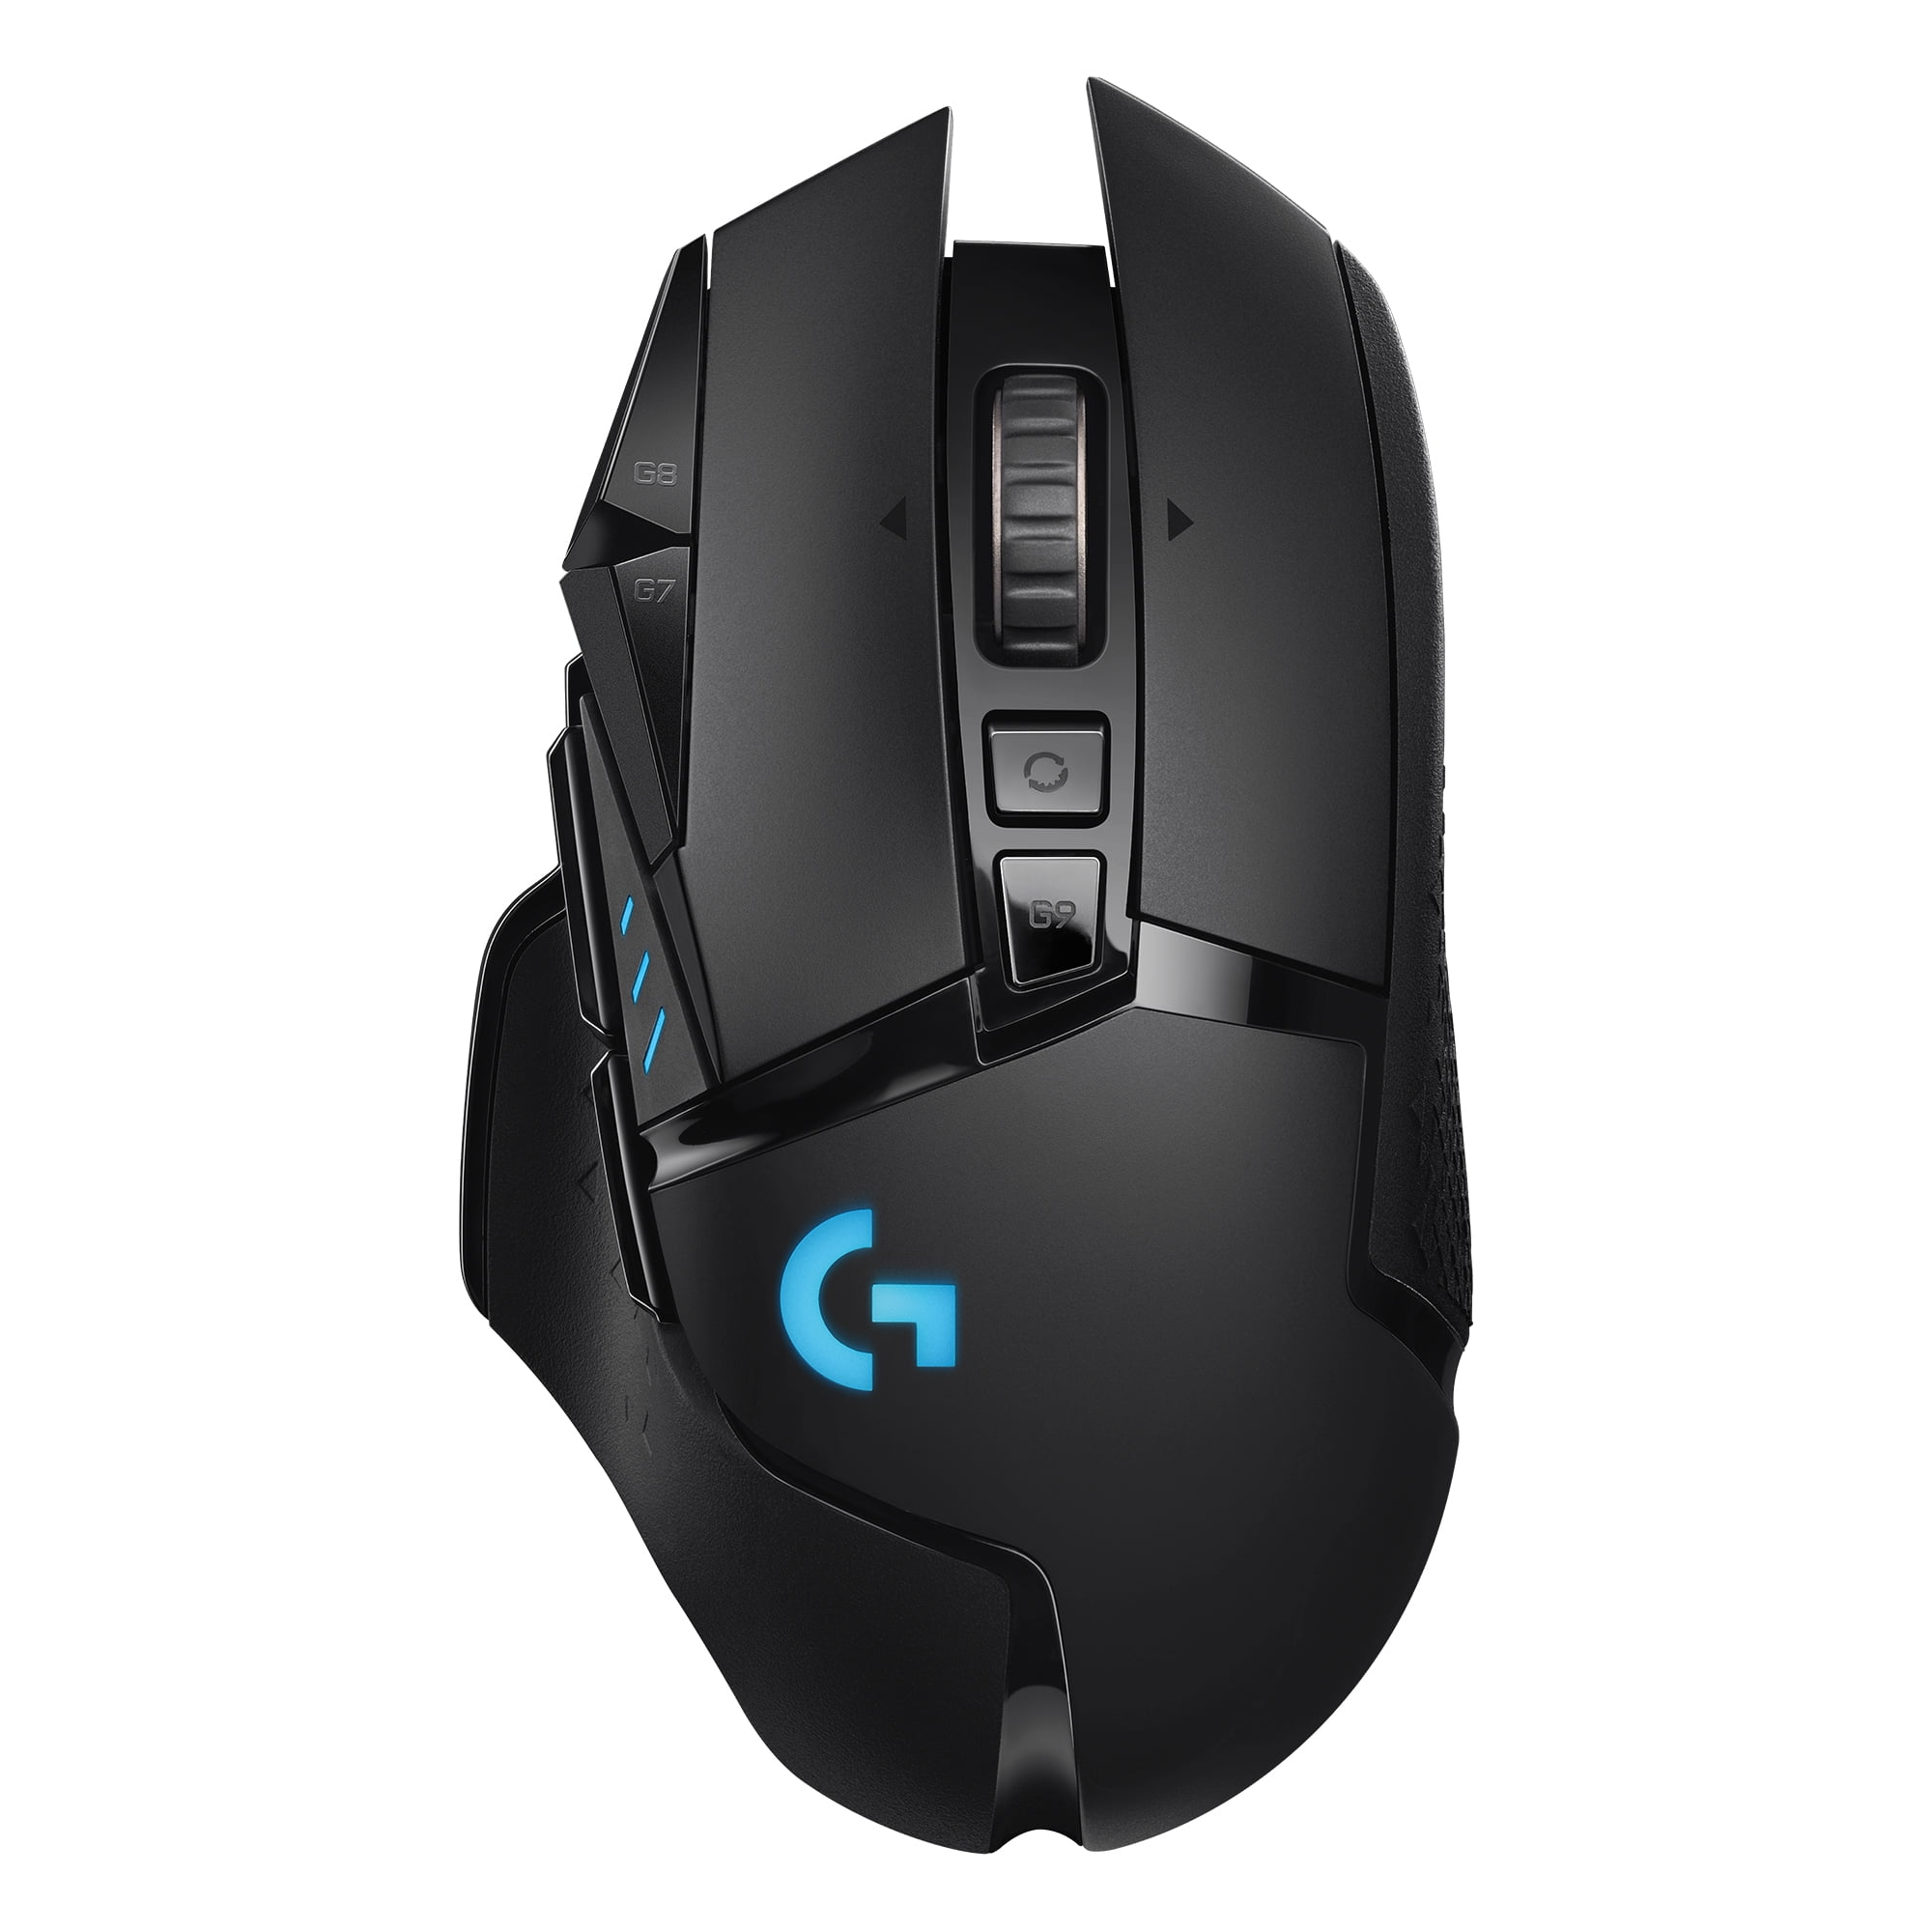 Logitech G502 gaming mouse offers adjustable weight